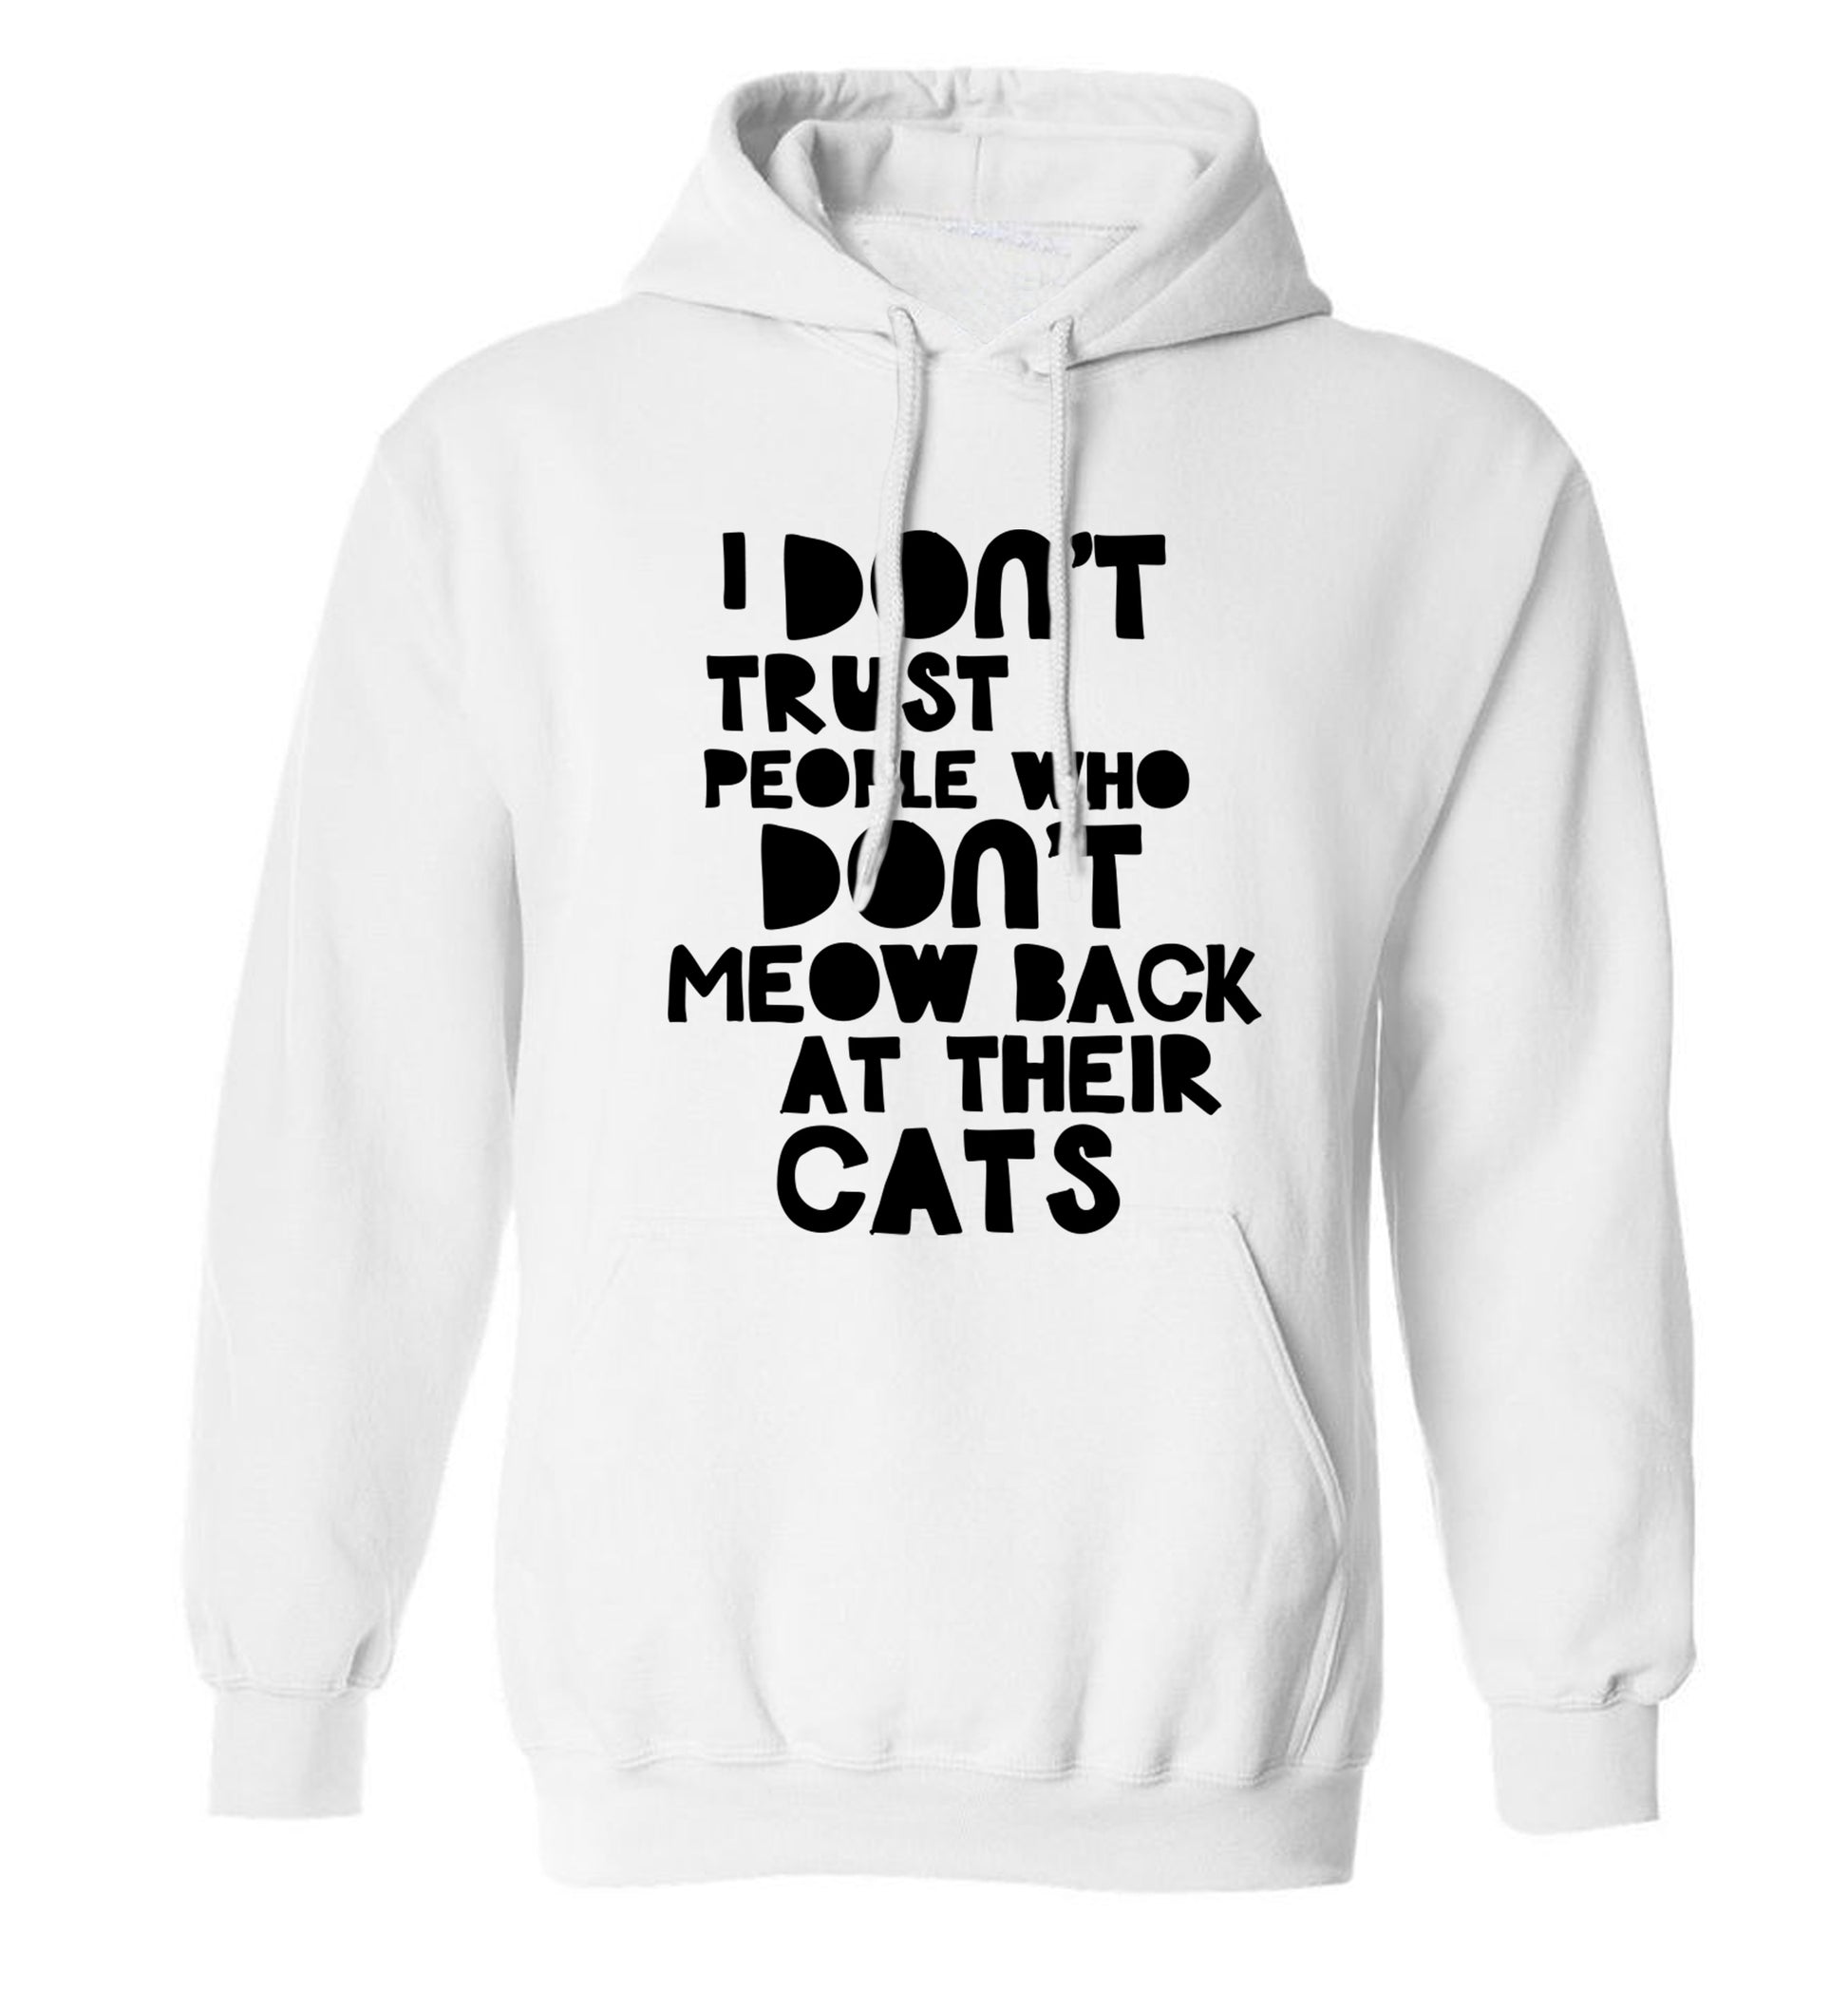 I don't trust people who don't meow back at their cats adults unisex white hoodie 2XL